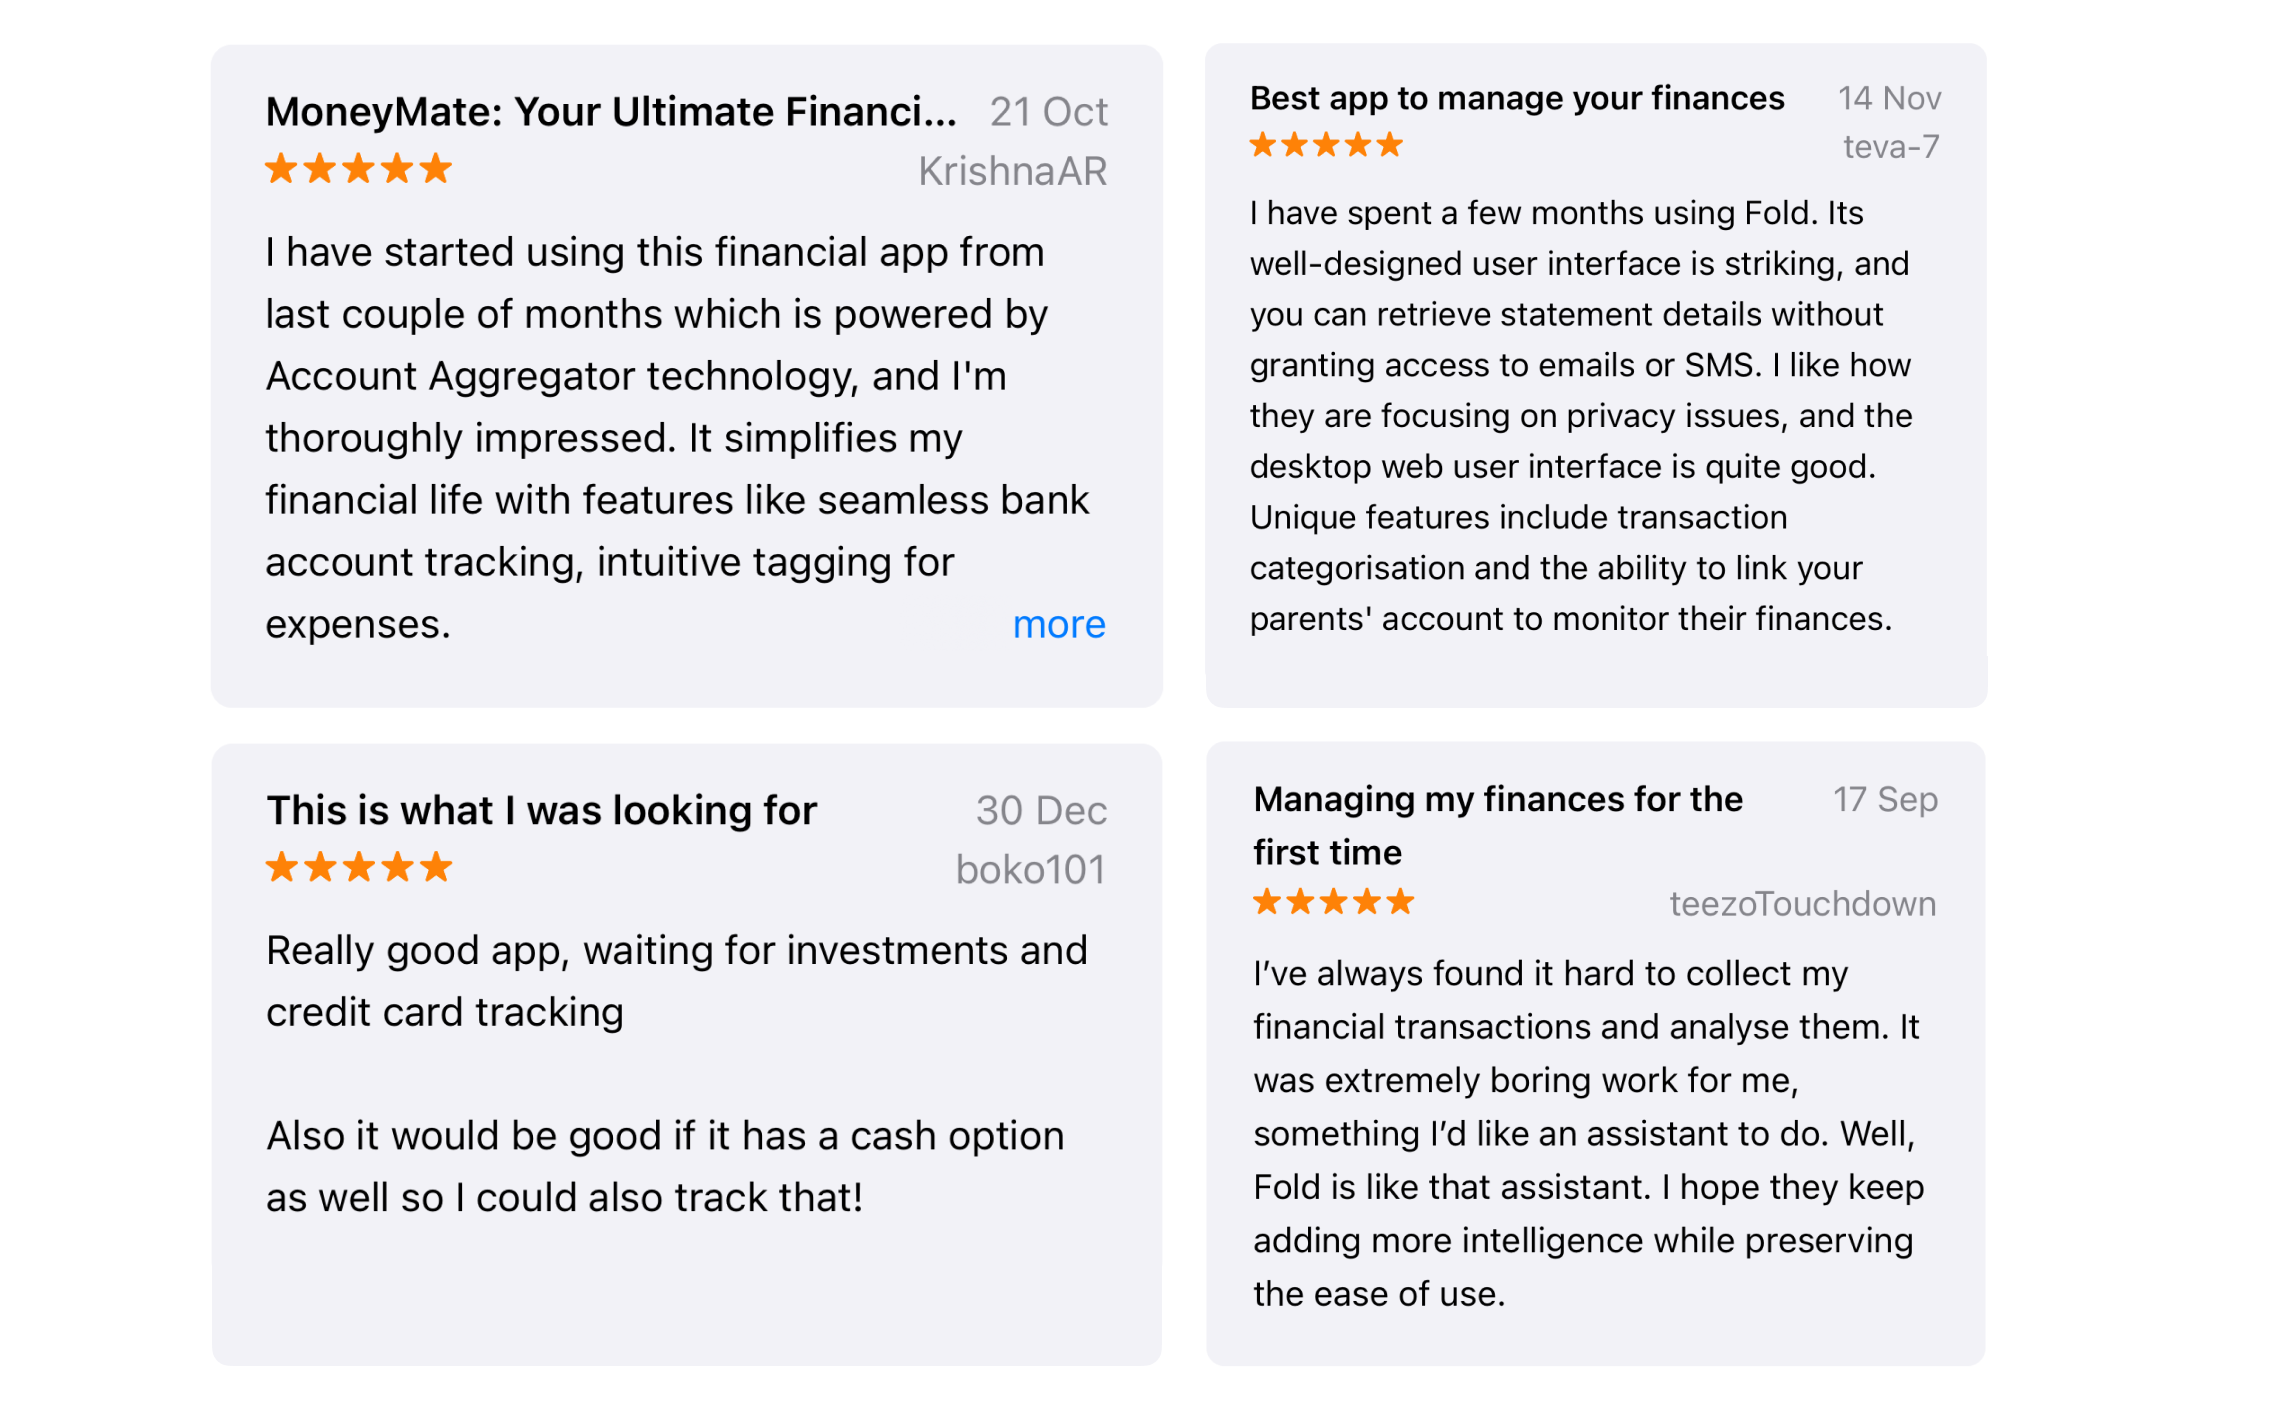 Screenshots of reviews for Fold app on App Store: 1. 5 stars - I have started using this financial app from last couple of months which is powered by Account Aggregator technology, and I'm thoroughly impressed. It simplifies my financial life with features like seamless bank account tracking, intuitive tagging for expenses.. 2. 5 stars - I have spent a few months using Fold. Its well-designed user interface is striking, and you can retrieve statement details without granting access to emails or SMS. I like how they are focusing on privacy issues, and the desktop web user interface is quite good.
Unique features include transaction categorisation and the ability to link your parents' account to monitor their finances. 3. 5 stars - Really good app, waiting for investments and credit card tracking. Also it would be good if it has a cash option as well so I could also track that! 4. 5 stars - I've always found it hard to collect my financial transactions and analyse them. It was extremely boring work for me, something l'd like an assistant to do. Well, Fold is like that assistant. I hope they keep adding more intelligence while preserving the ease of use.